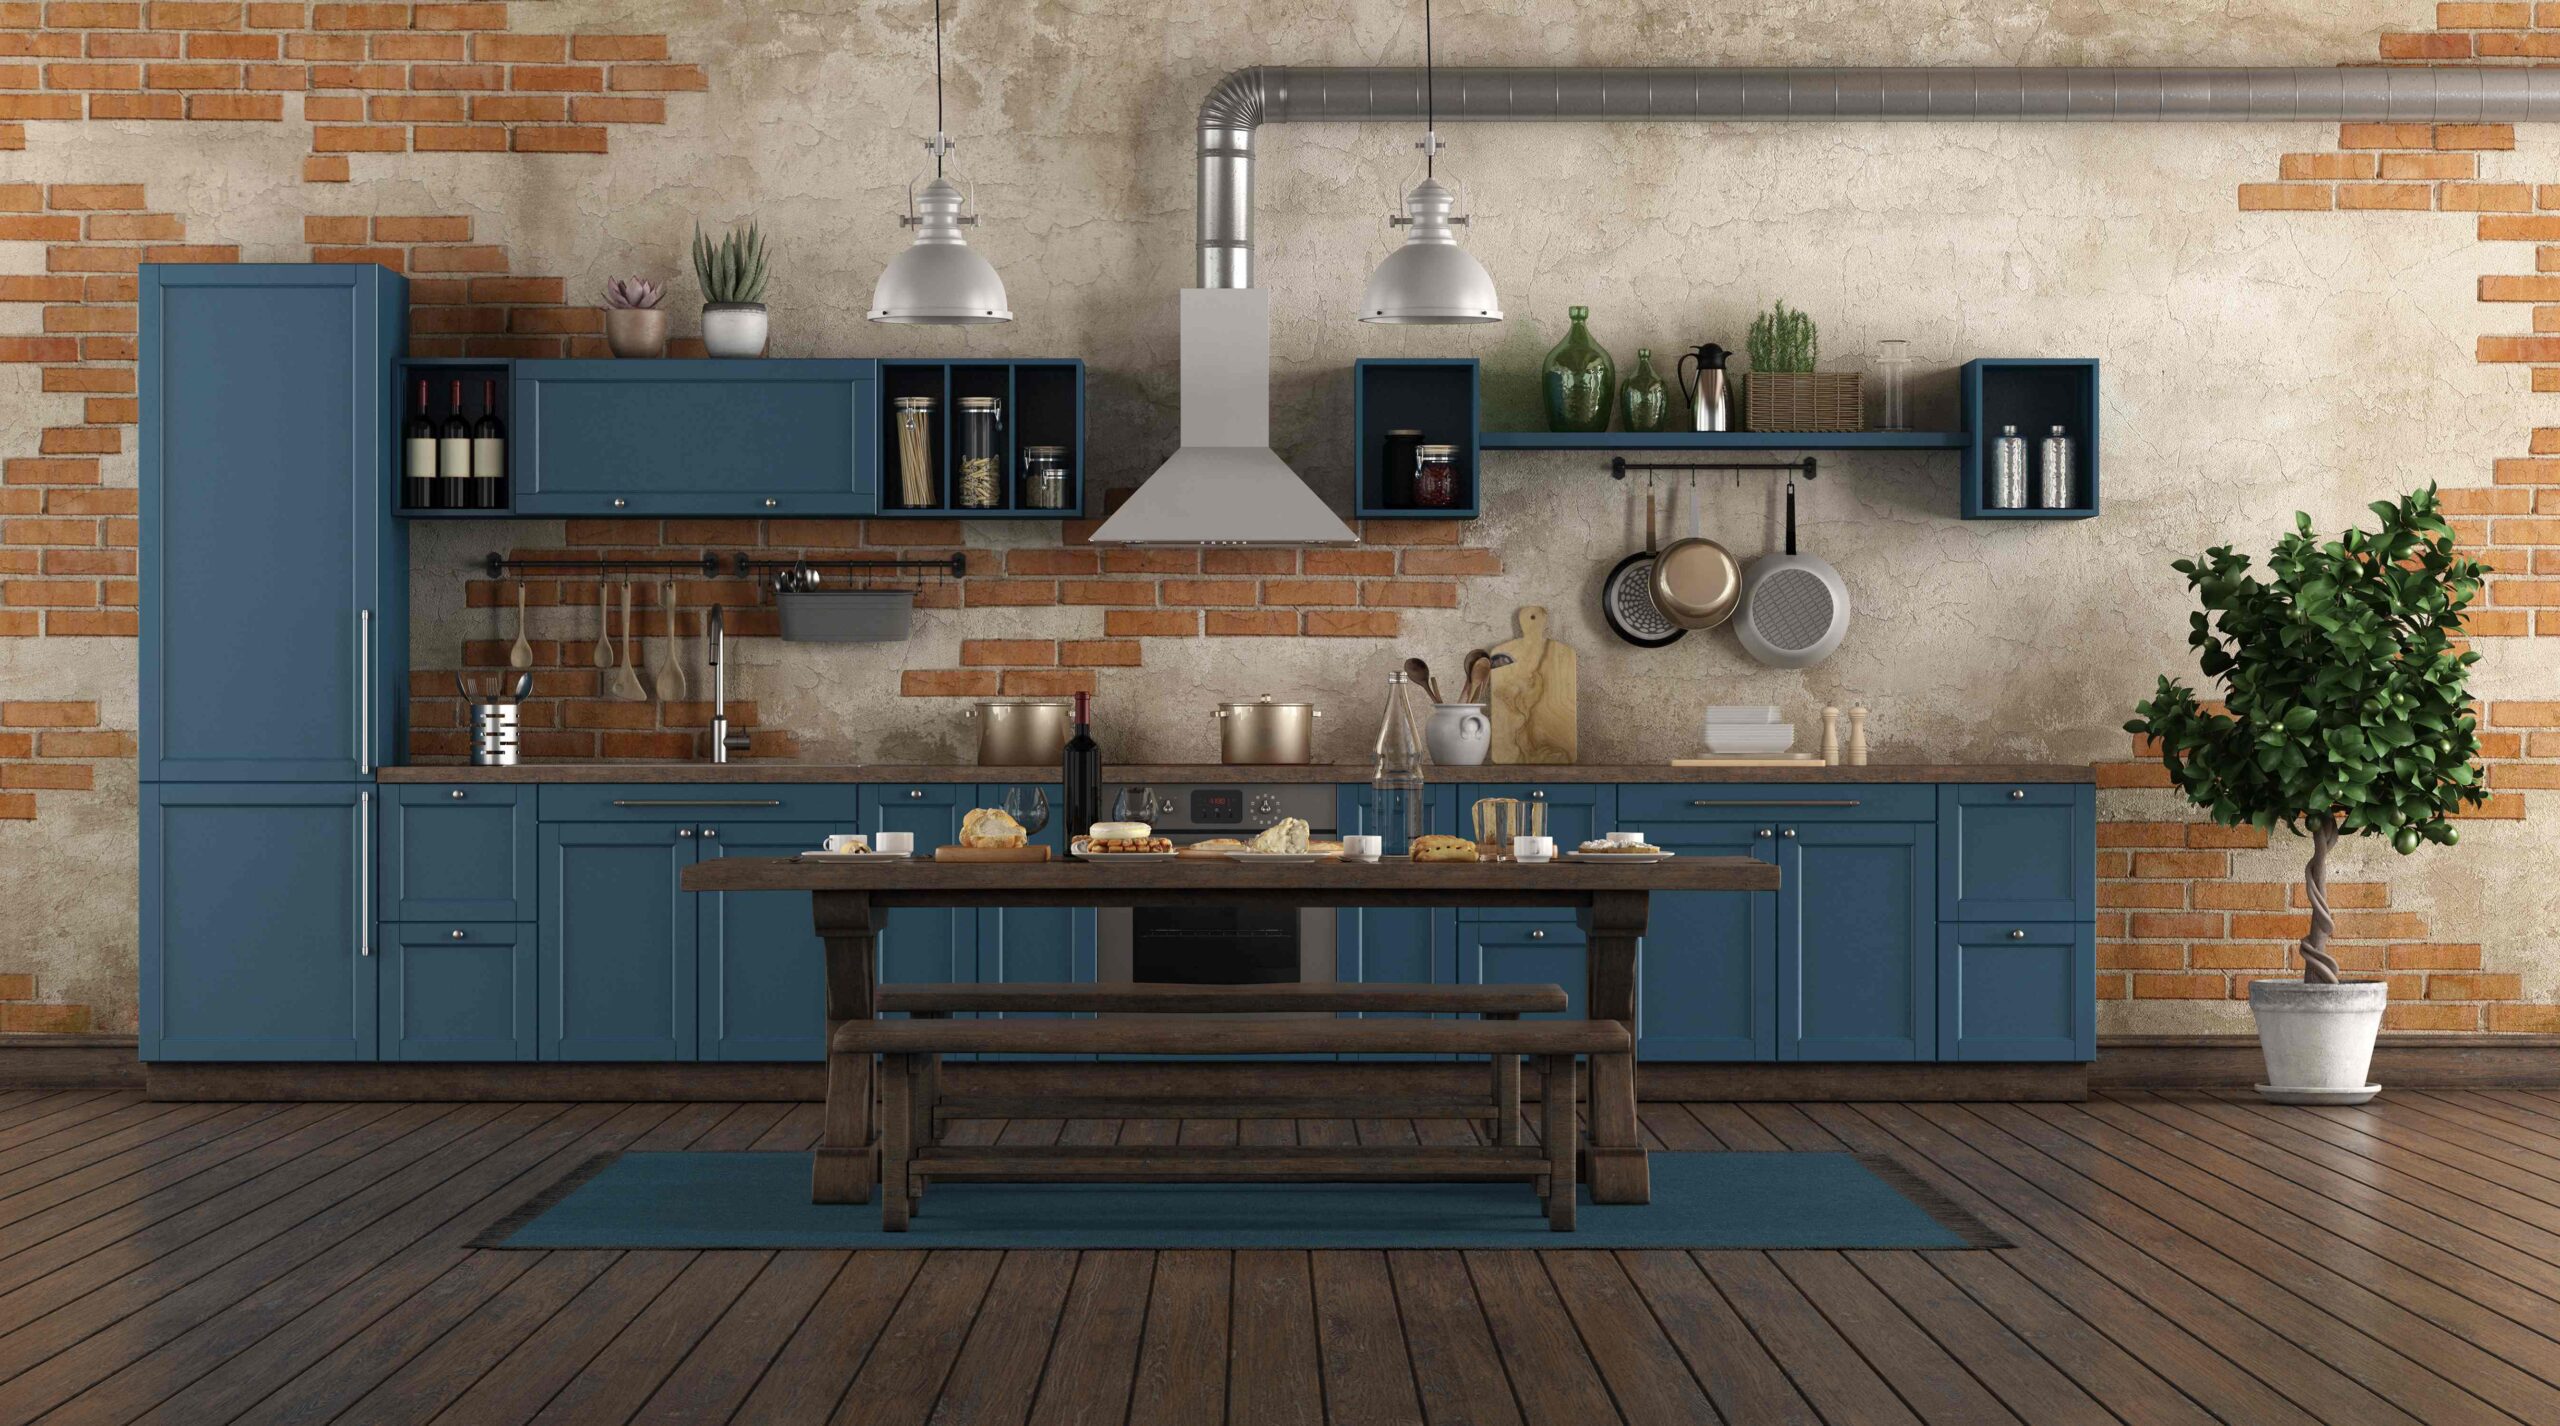 classic style blue kitchen in a old room 2VYHQZ9 1 scaled